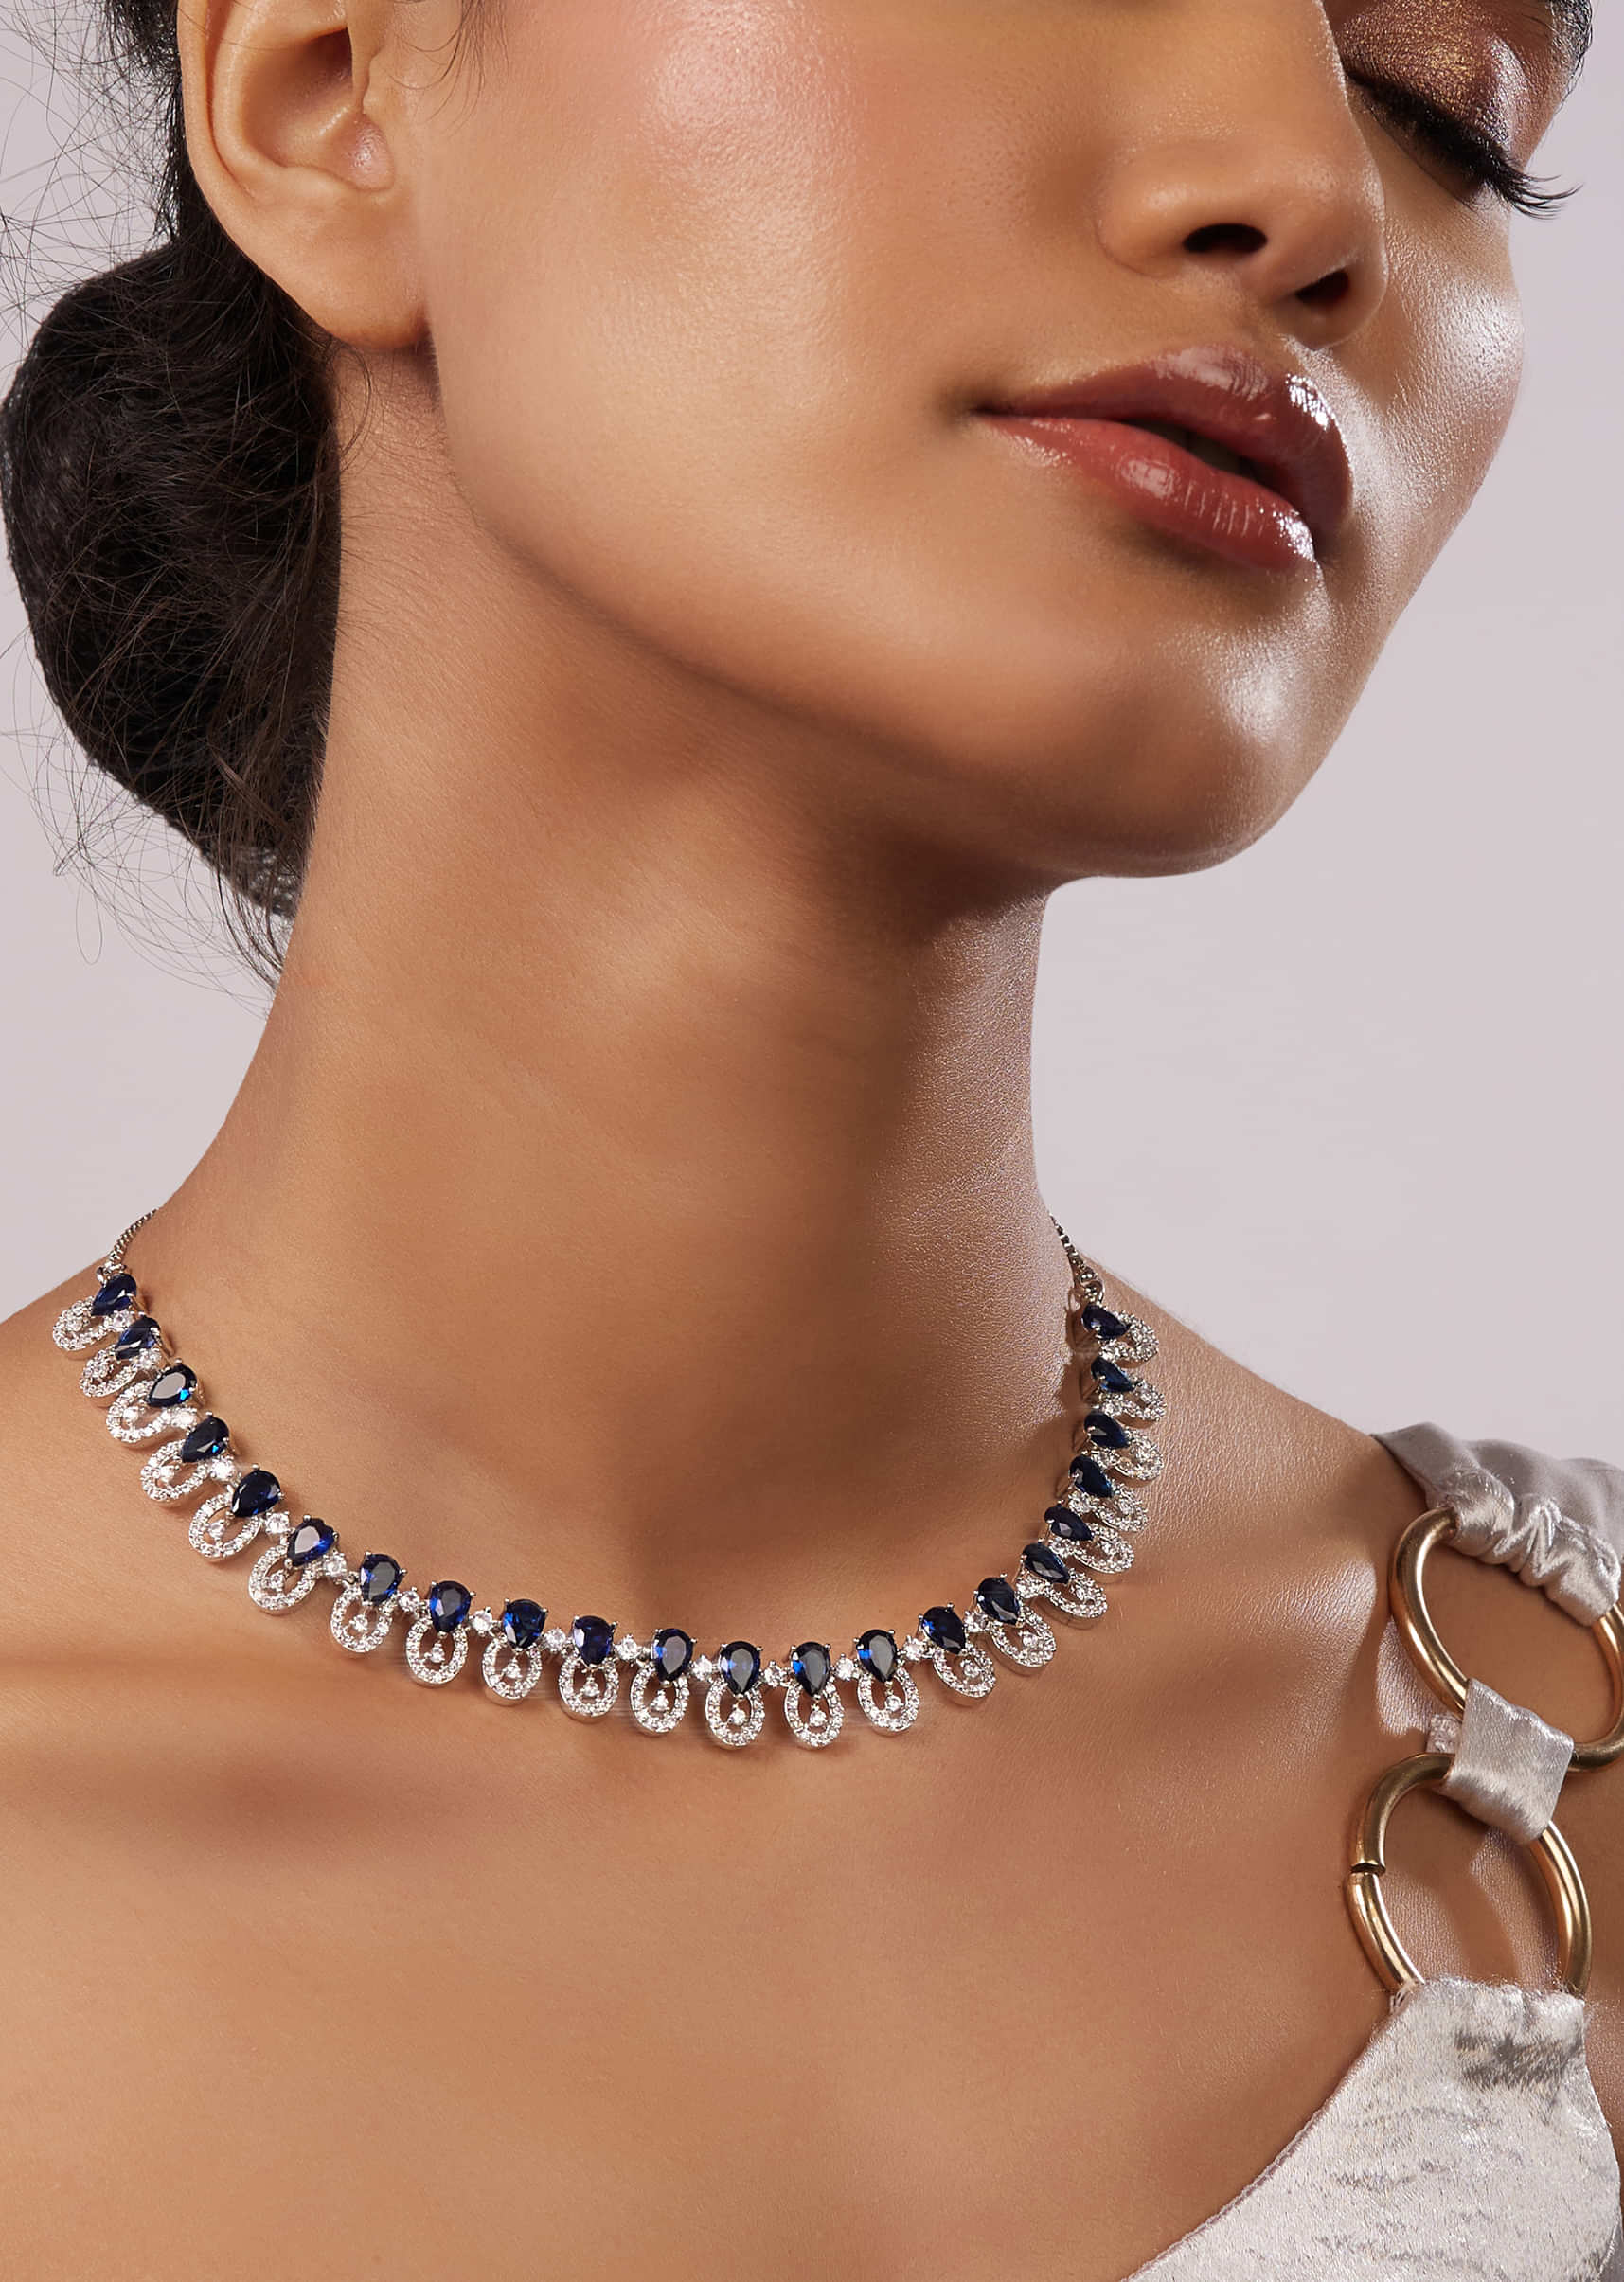 Diamond Necklace Set In Silver Plating With Navy Blue Stones